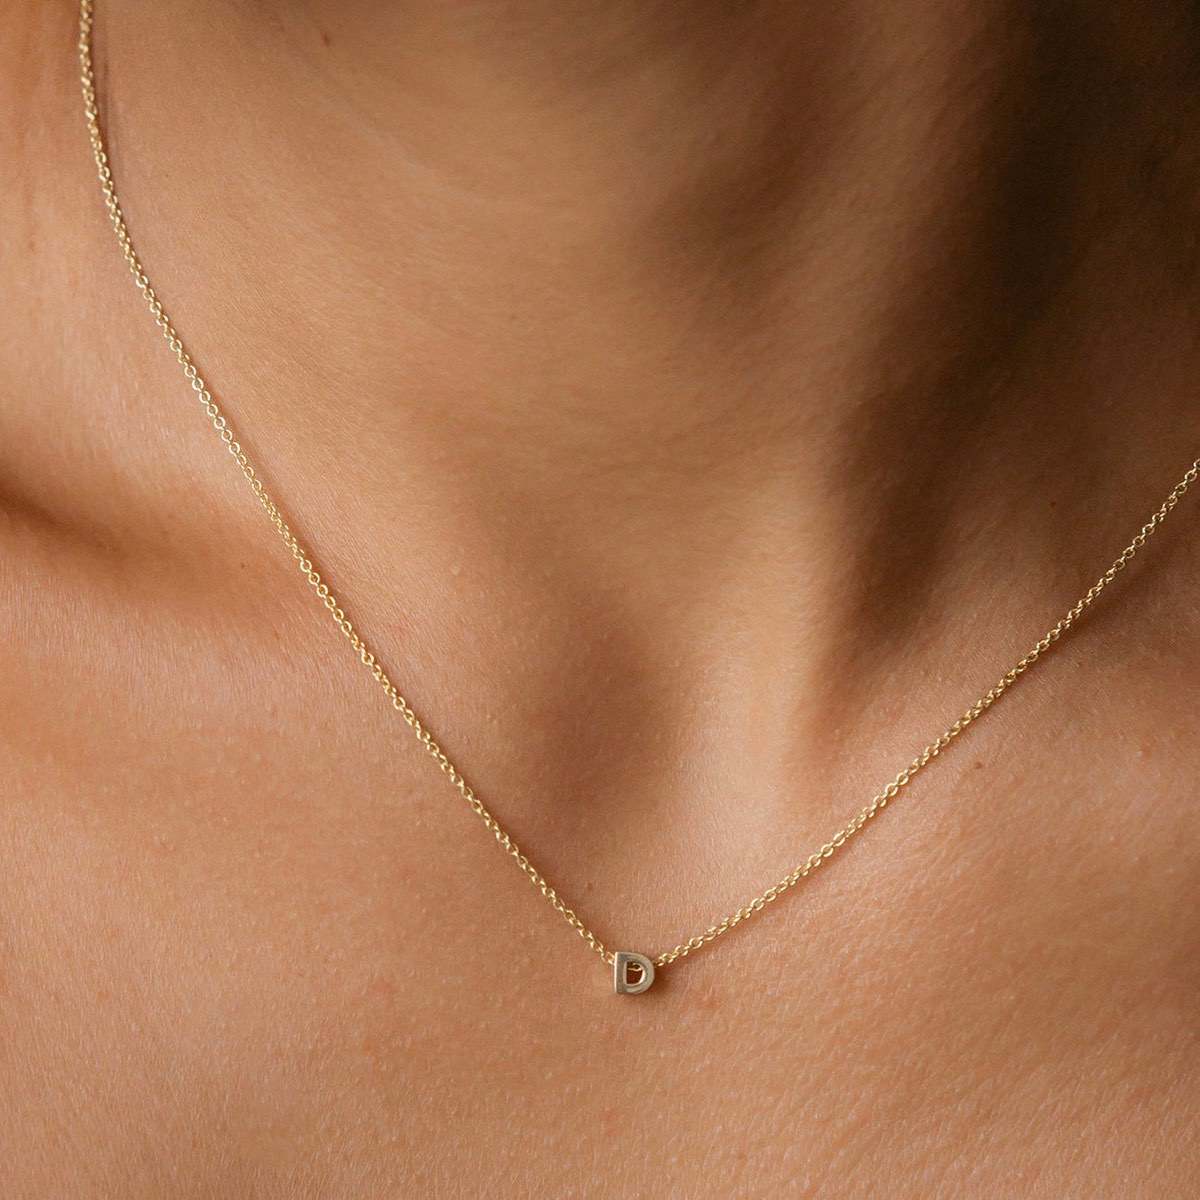 Hand finished solid gold letter necklace: Close up of a model wearing our beautiful 9ct yellow gold Tiny Letter D Charm Necklace with a 40cm cable chain